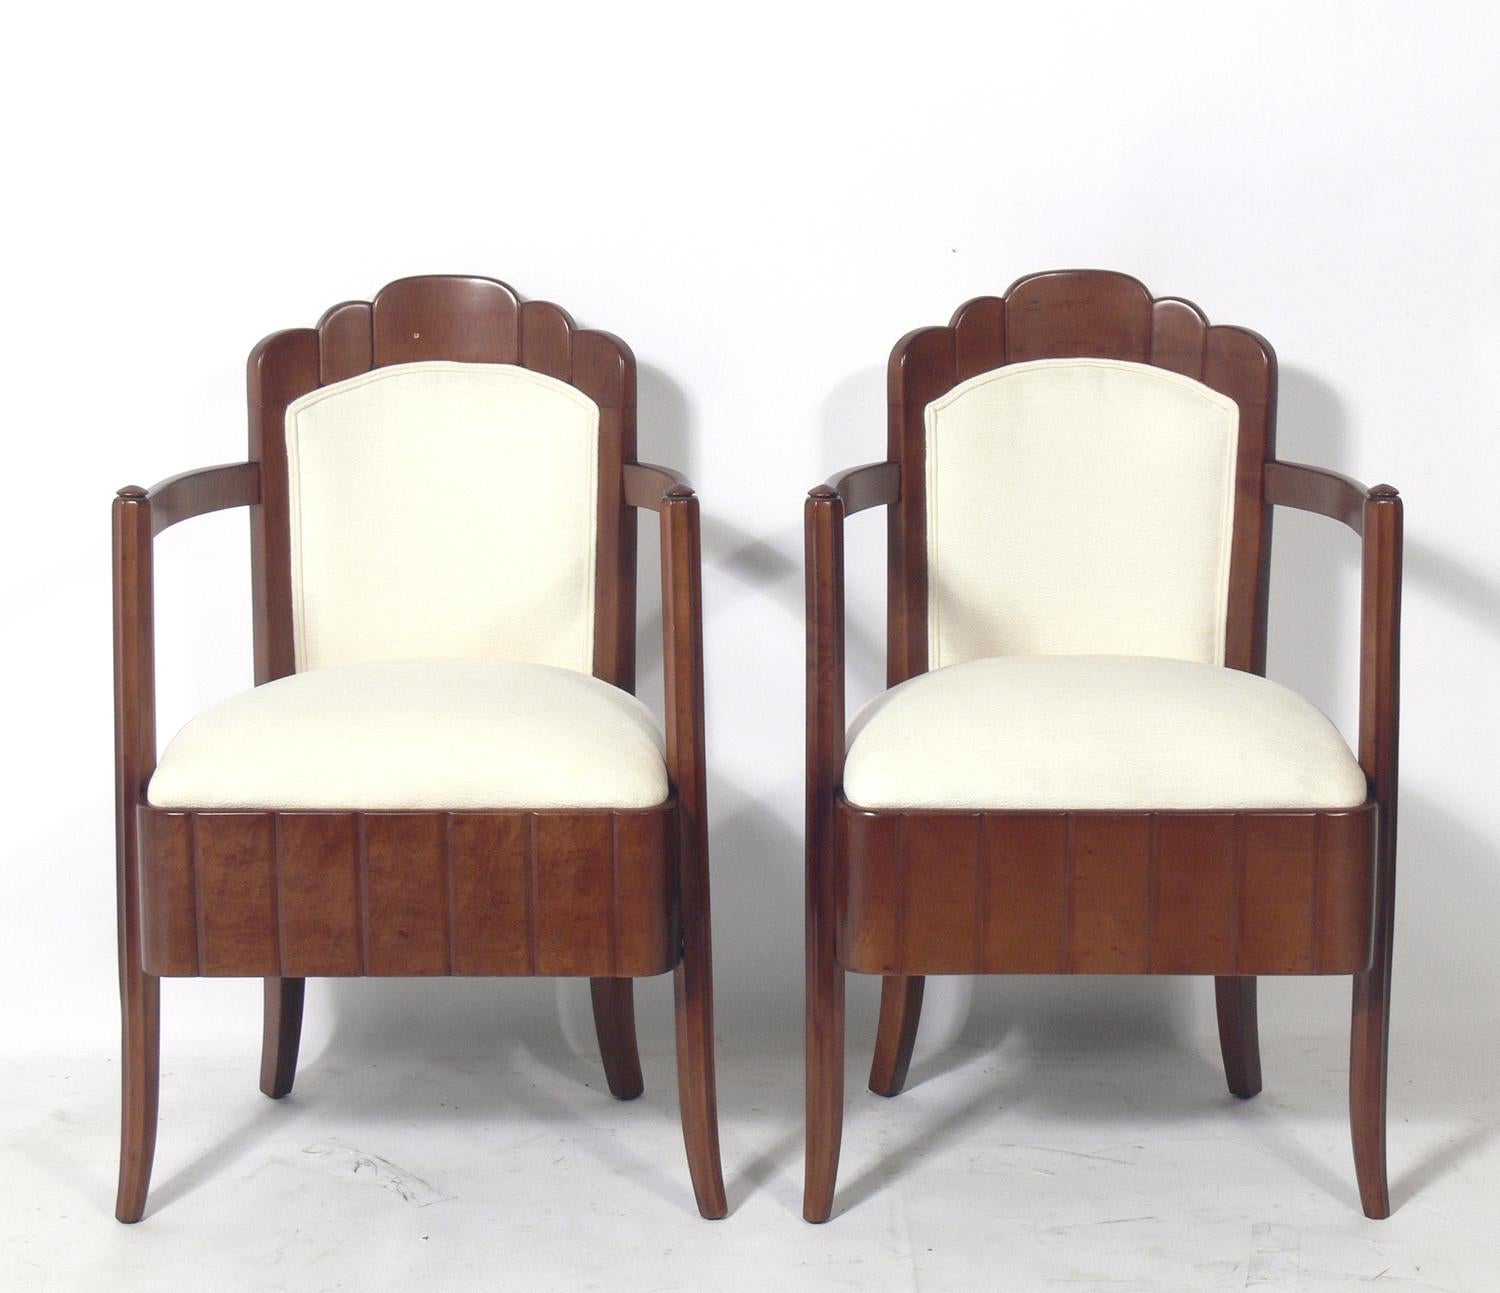 Pair of Art Deco armchairs, designed by Pierre Patout, for the Ile de France ocean liner, French, circa 1930s. They have been completely restored. Refinished in their original color and reupholstered in an ivory bouclé fabric.